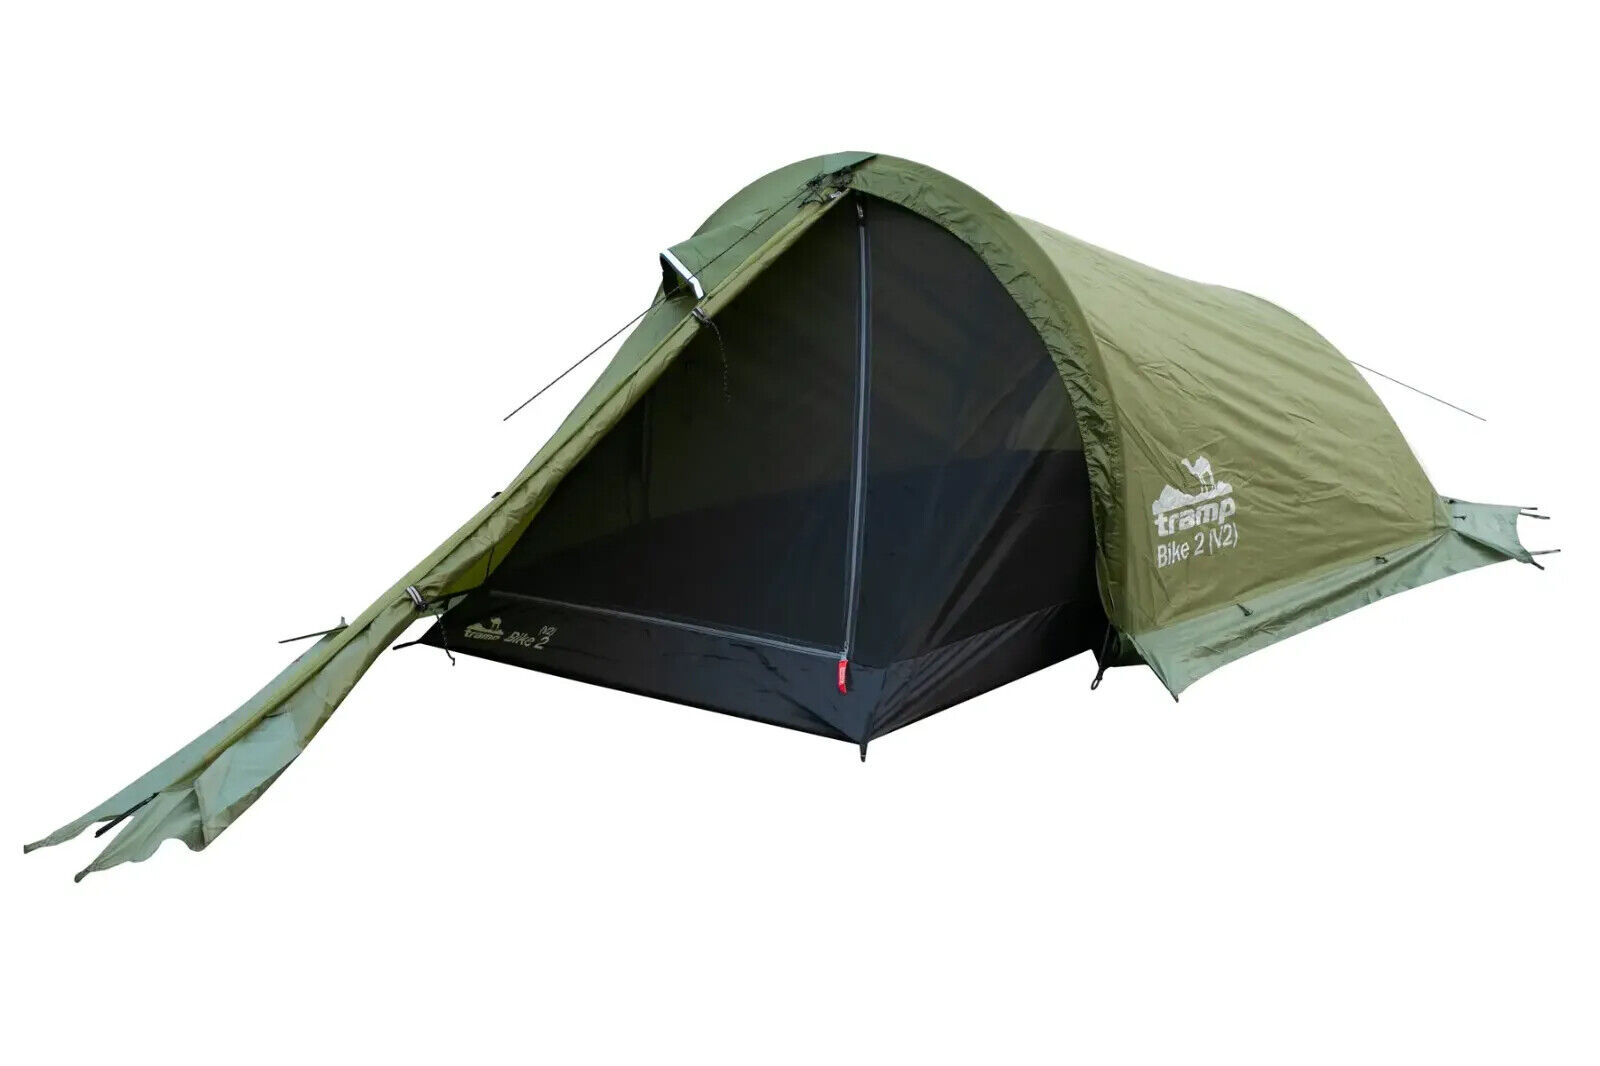 Tramp. Bike 2. Expedition tent for 2 person. All season. PU 8000 mm